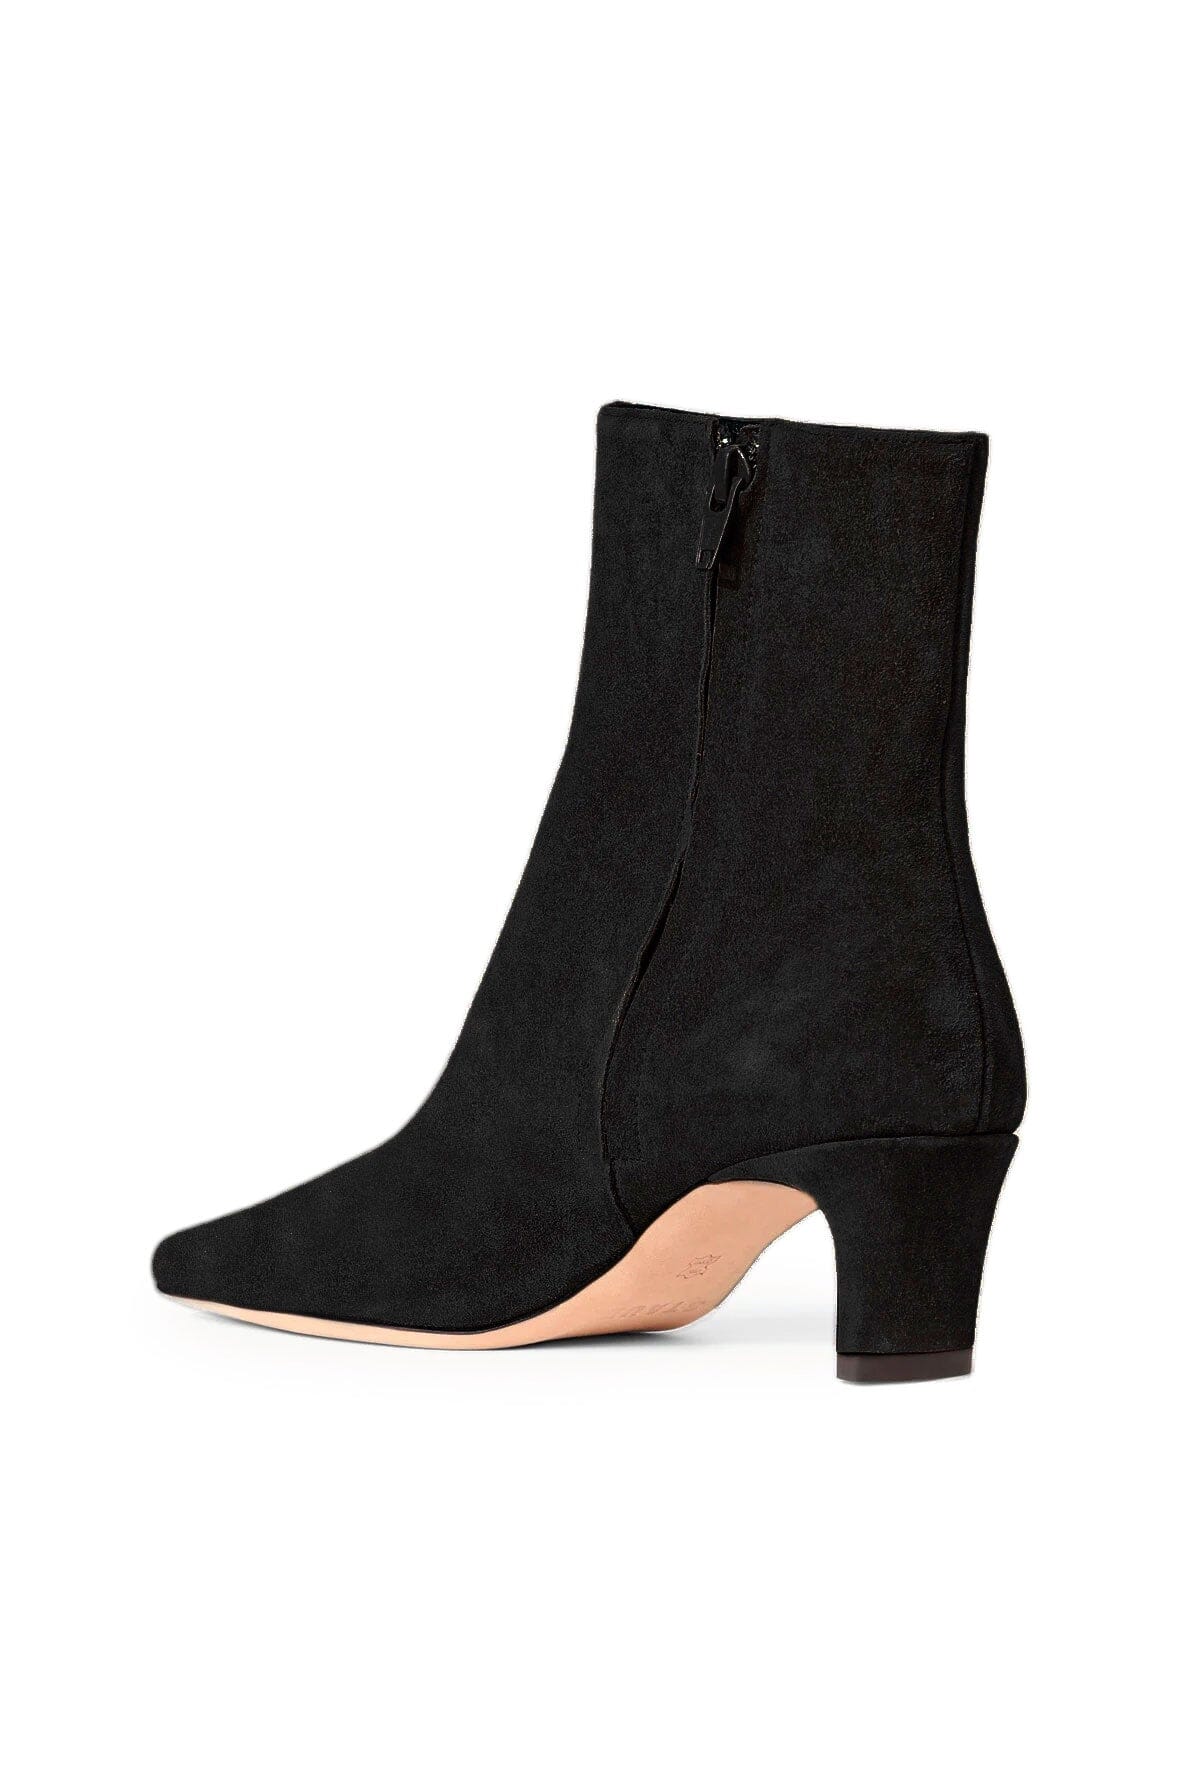 STAUD WALLY ANKLE BOOT BLACK SUEDE